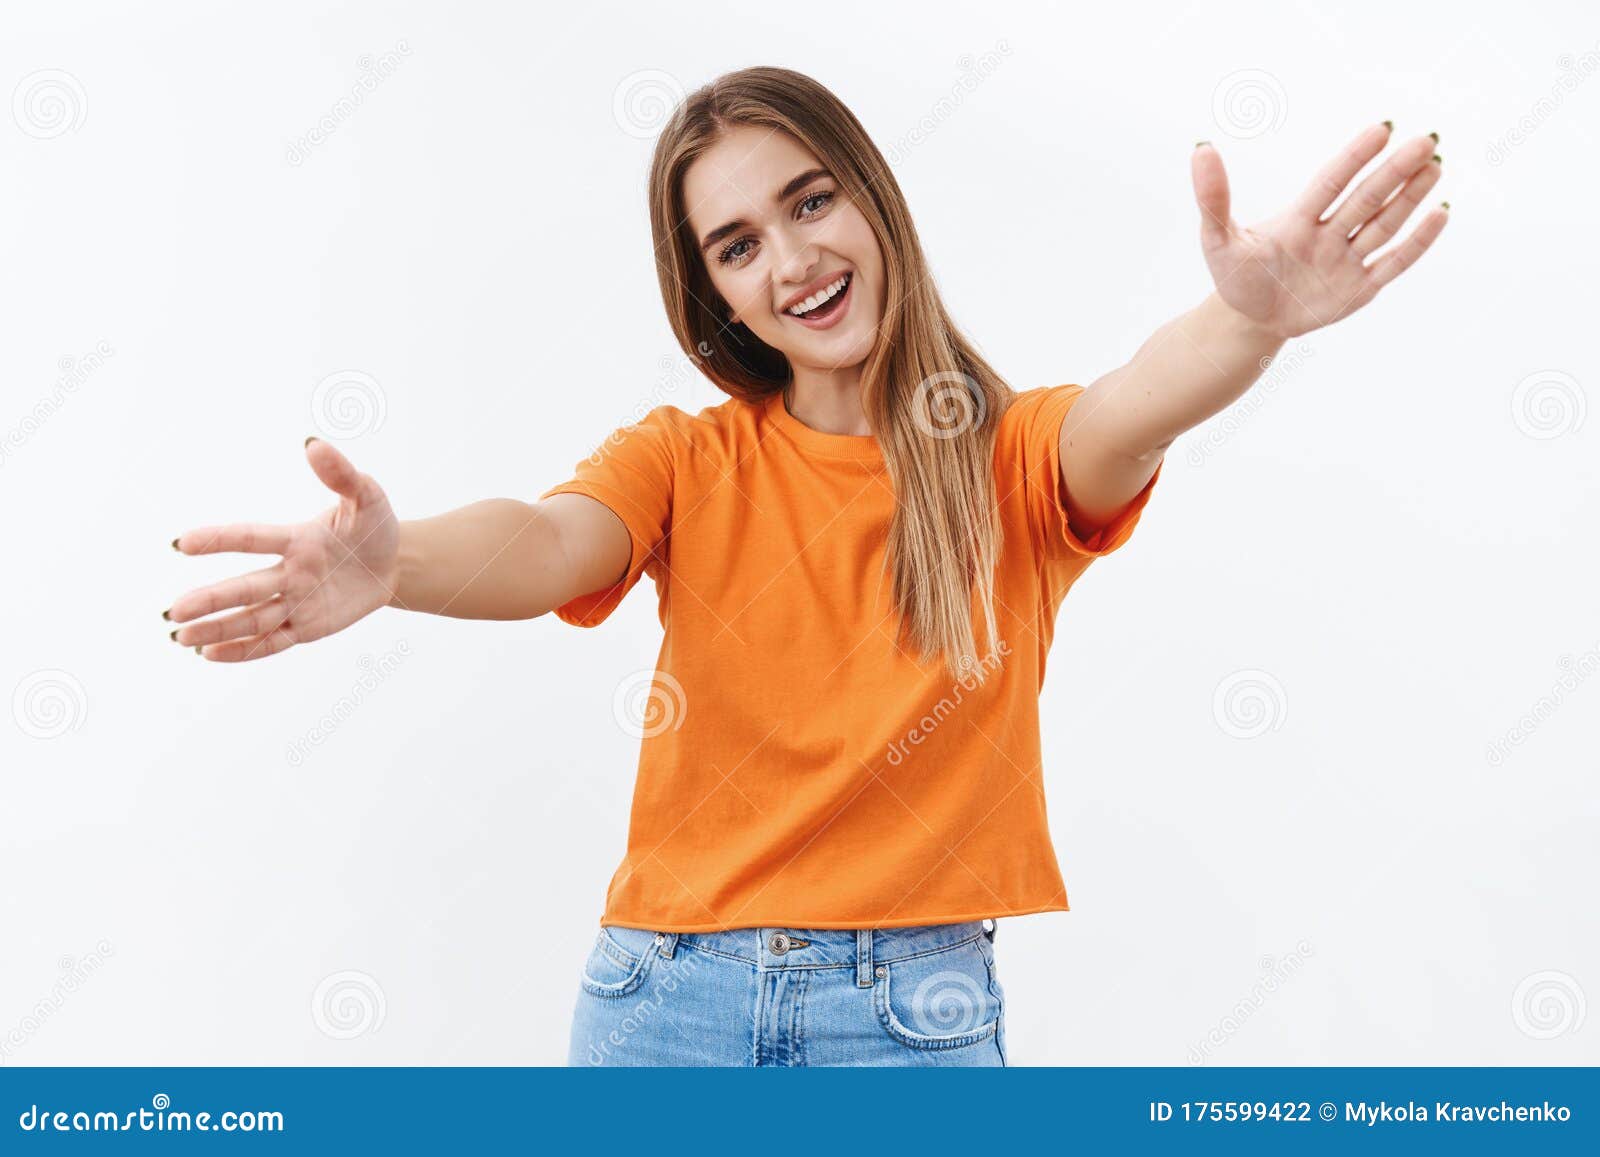 Cute Blond Girl Inviting You For Hug Extend Hands In Warm Welcome